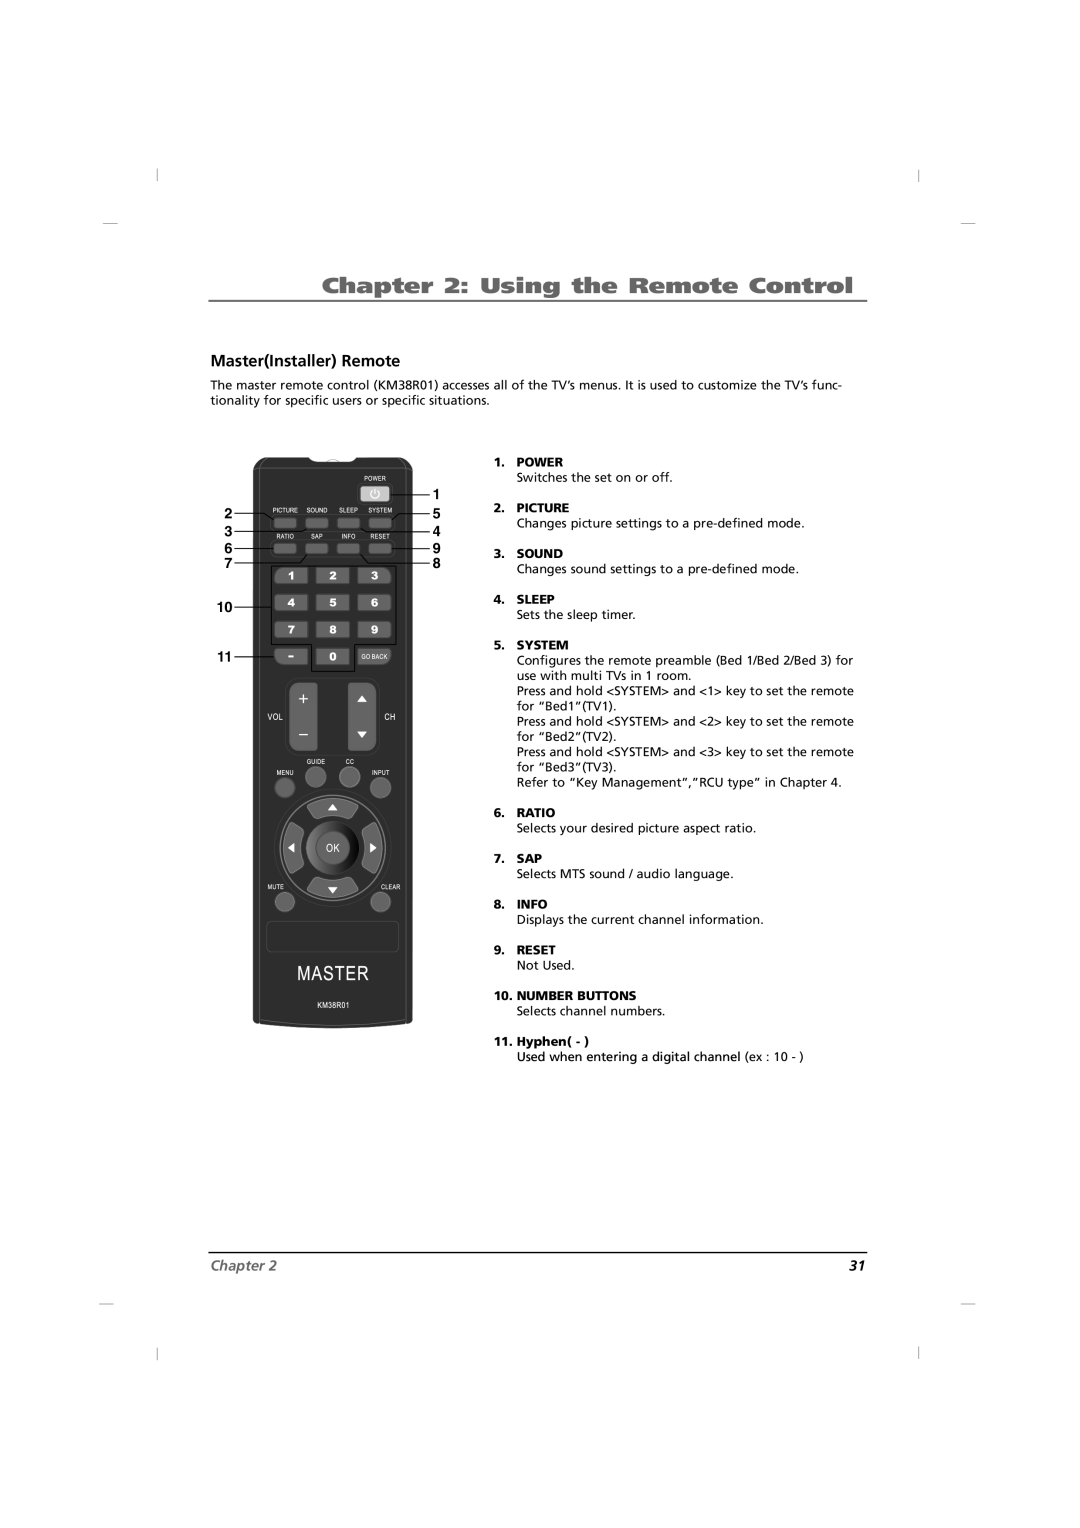 RCA J32CE720, J42CE820, J26CE820 manual MasterInstaller Remote, Using the Remote Control, Chapter 